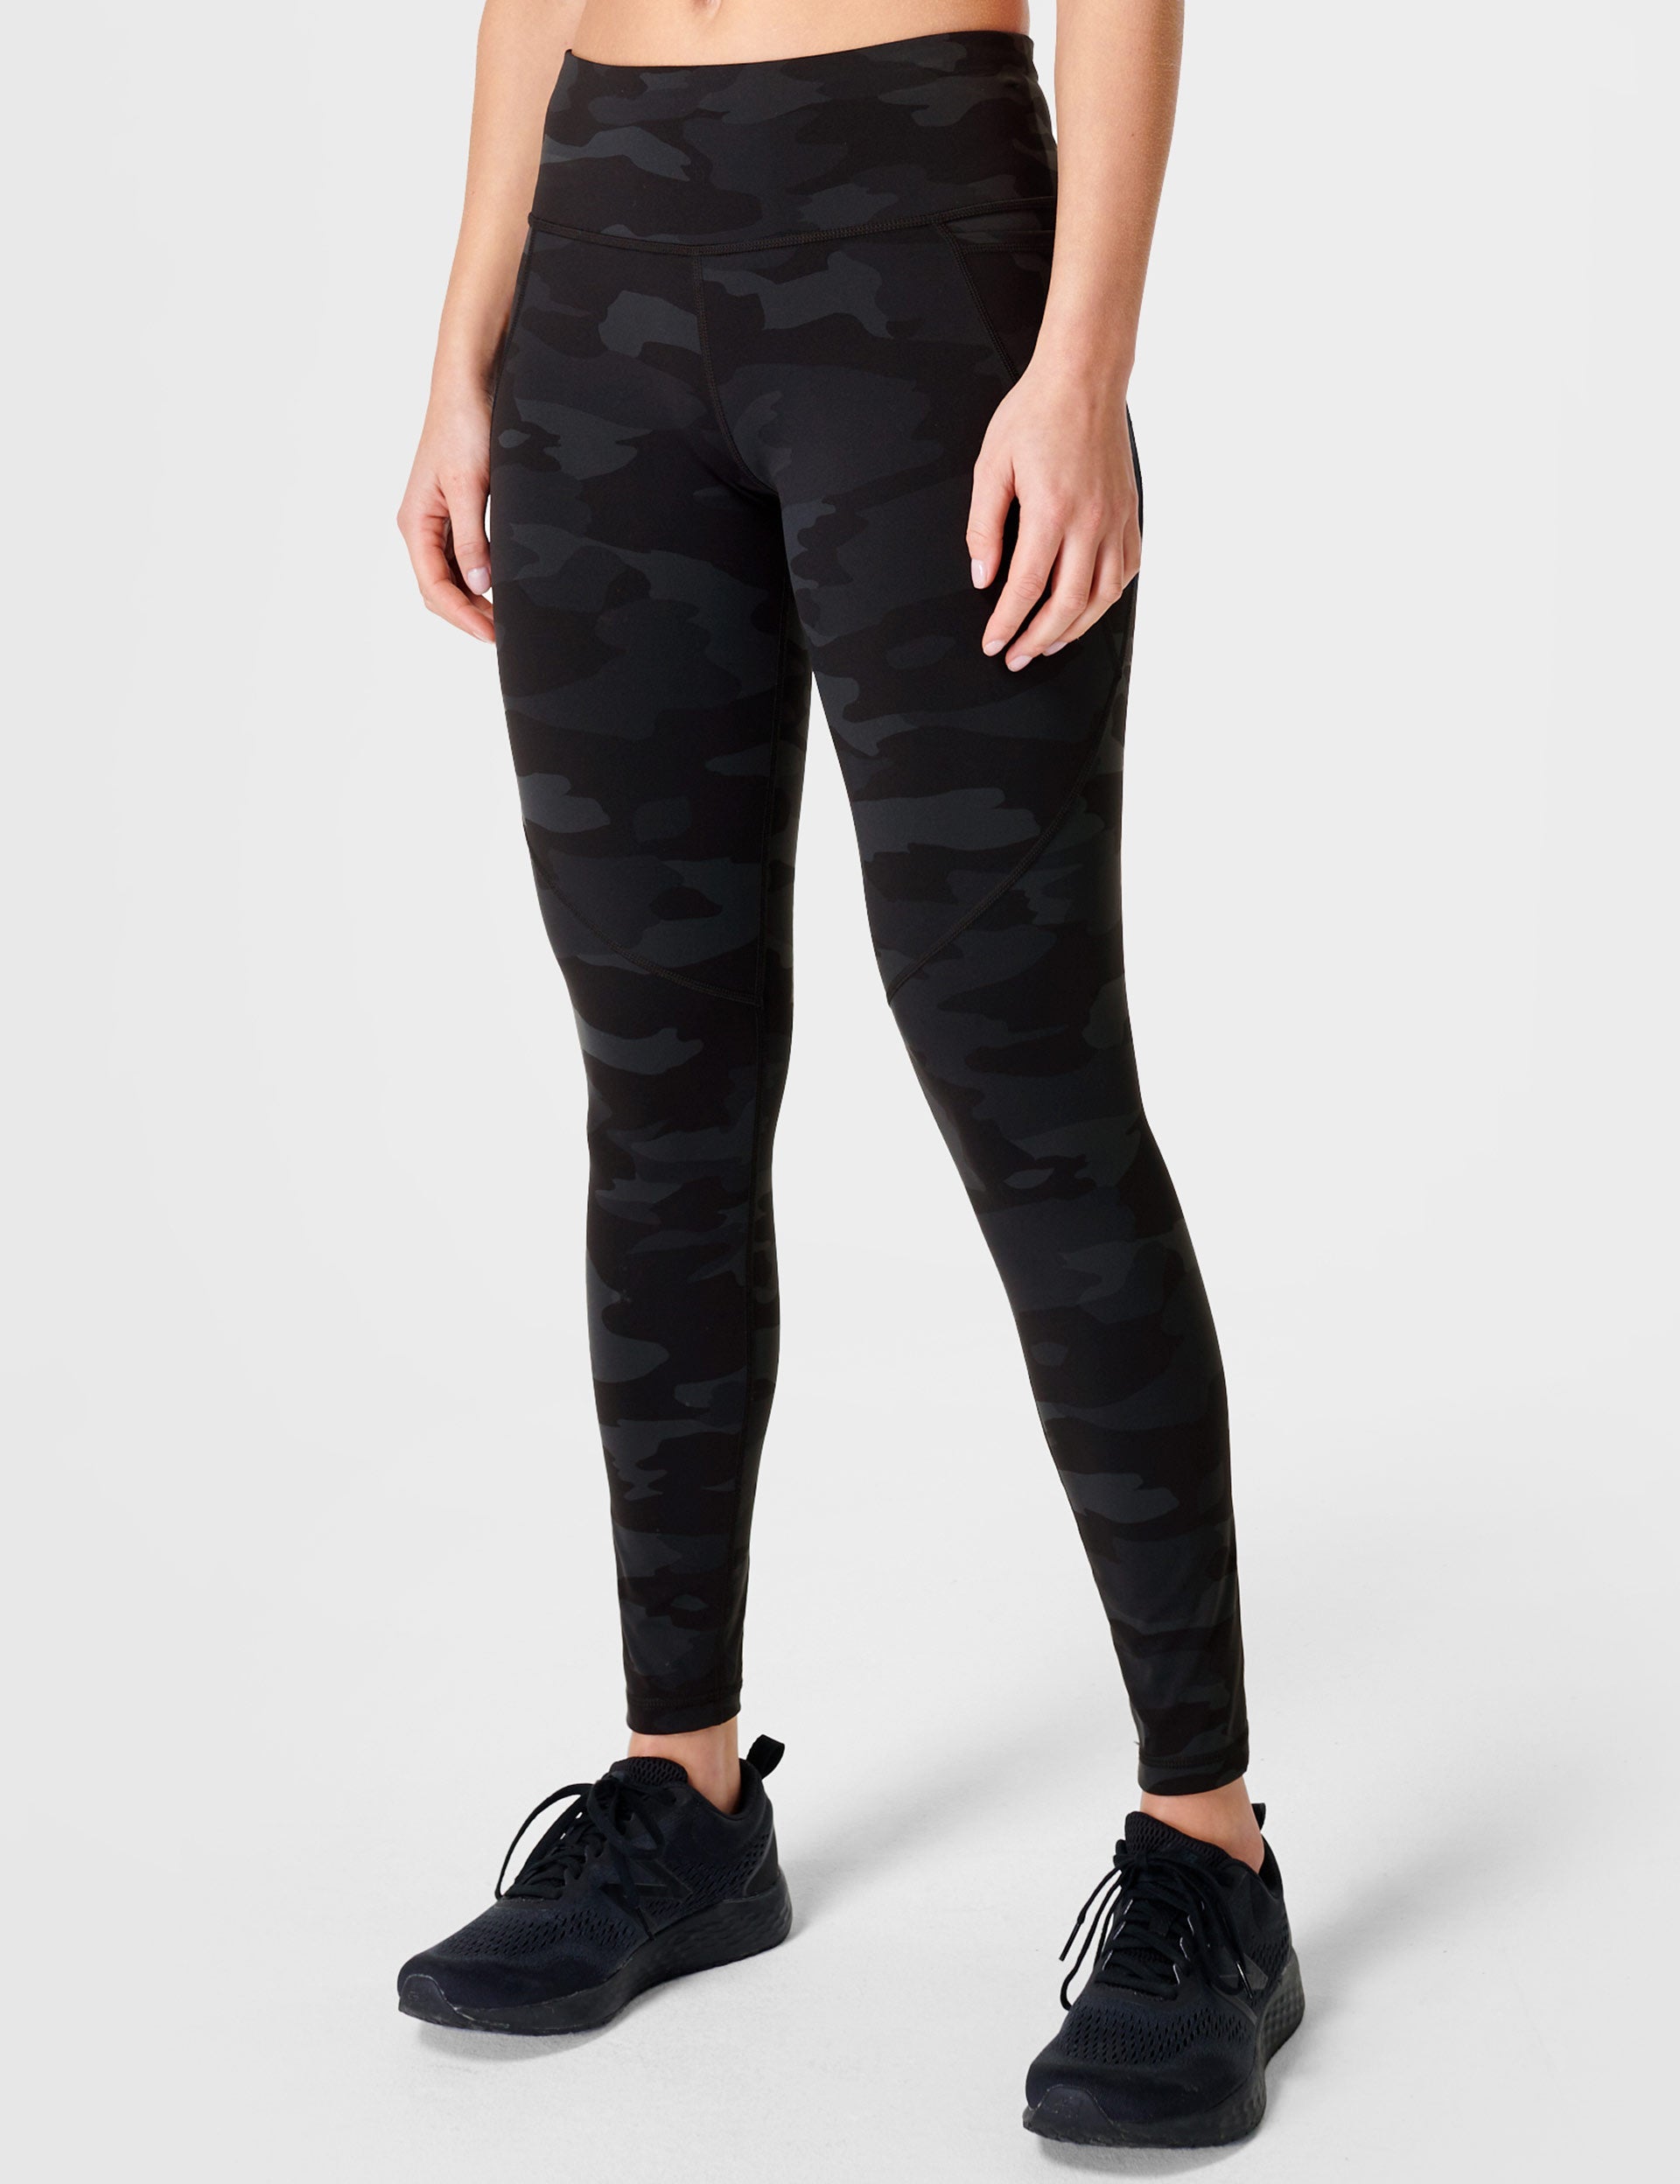 Camo Camouflage Joggers for Women - Sporty Chimp legging, workout gear &  more